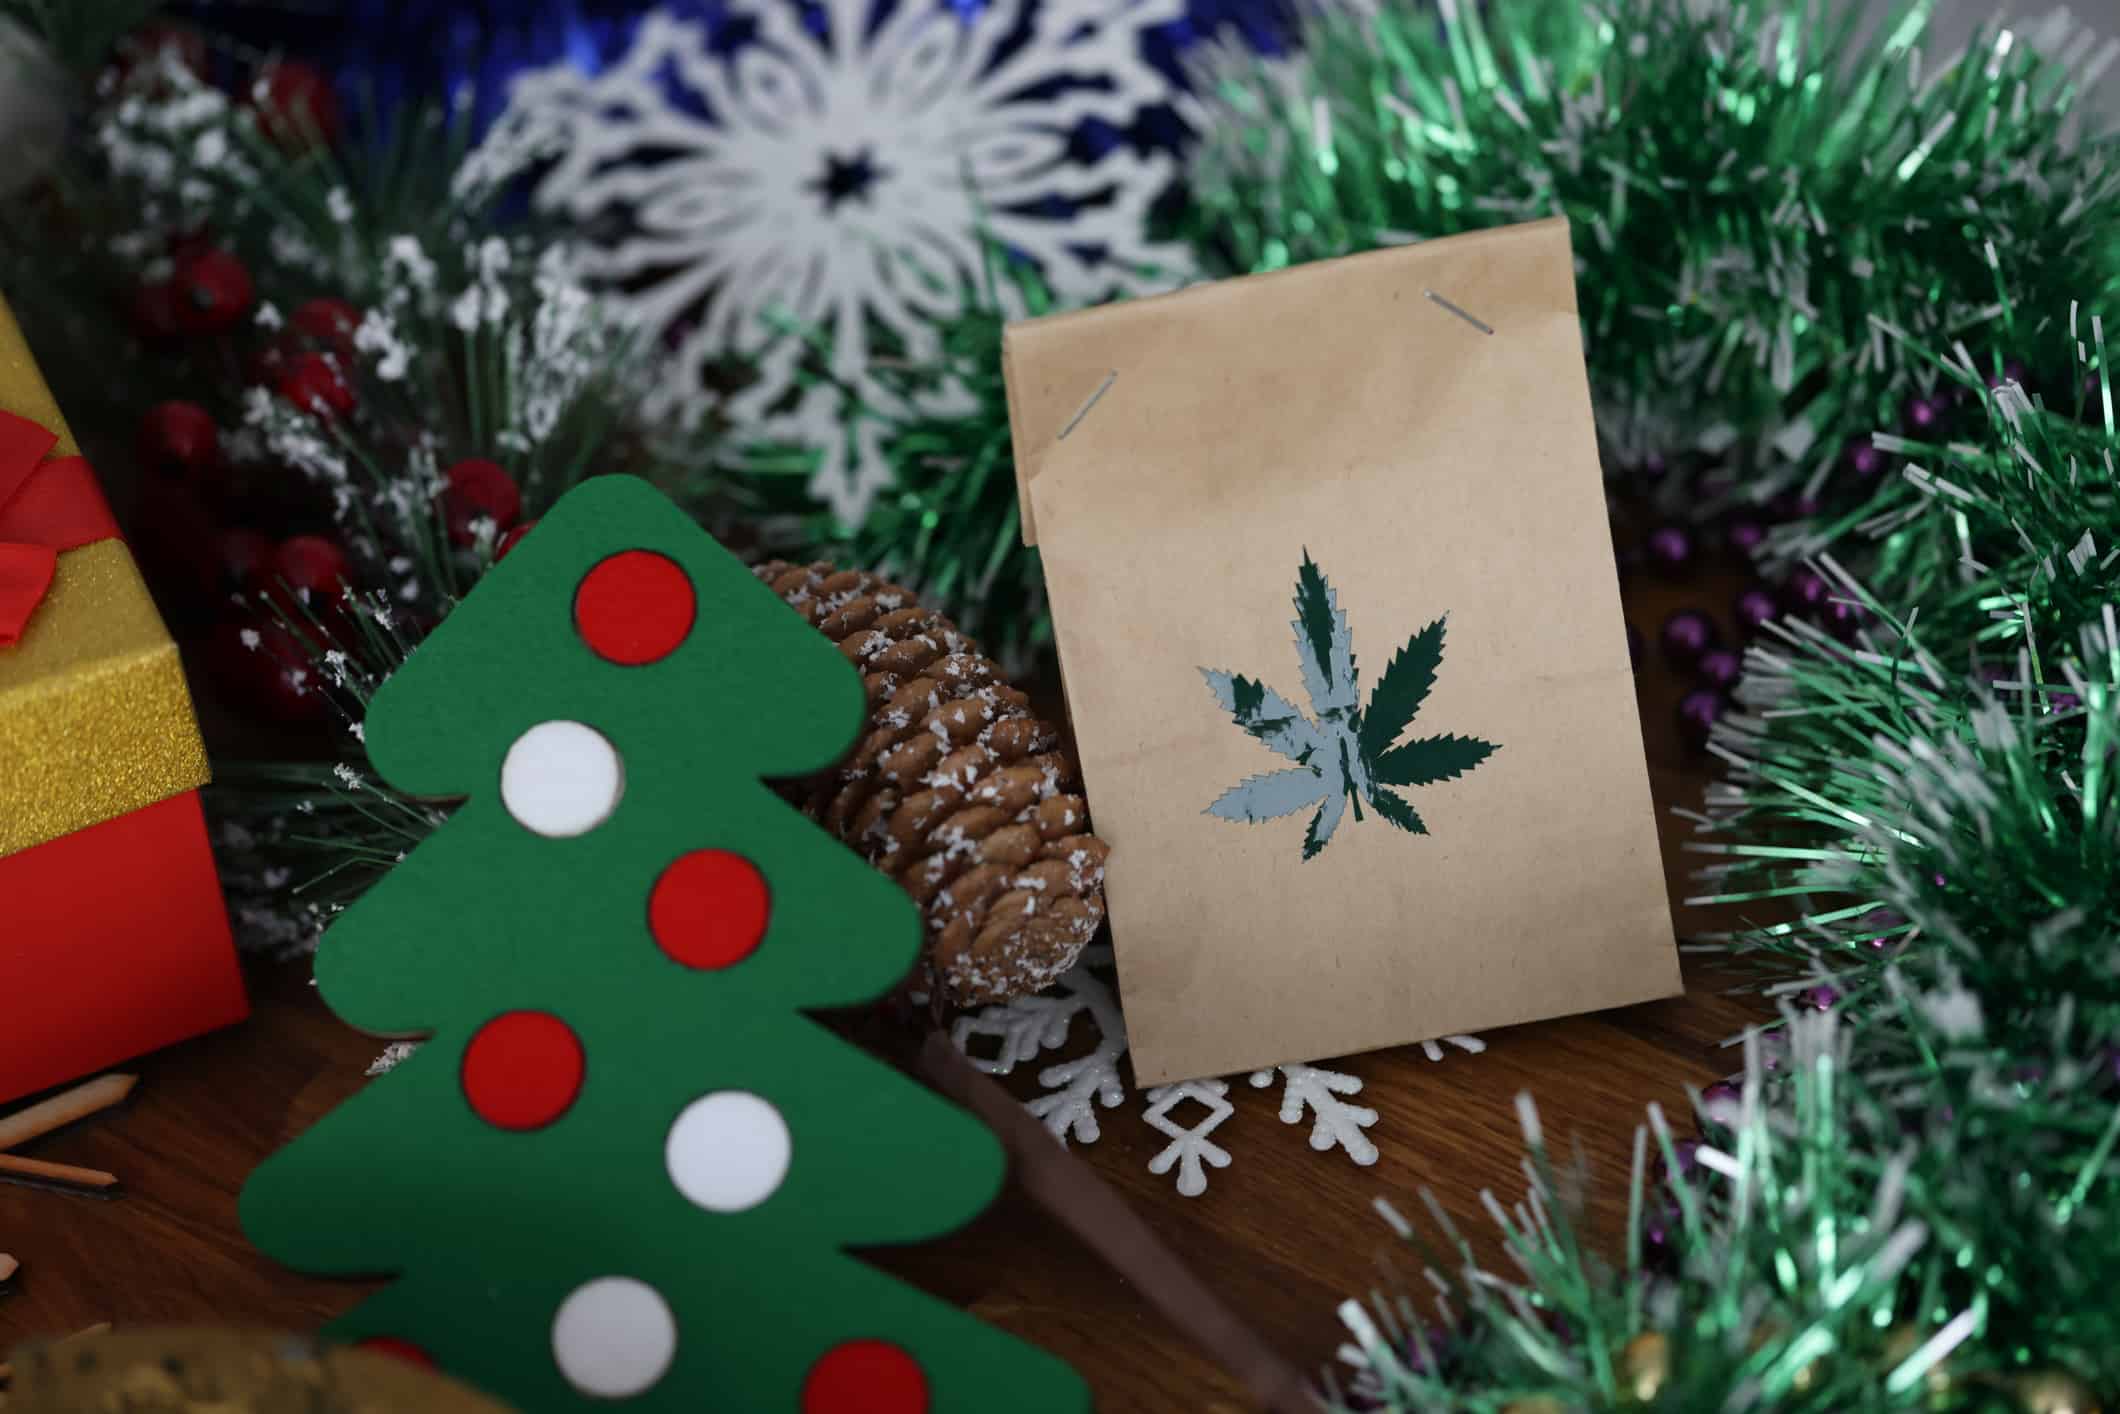 Our Guide to Holiday Cannabis Gift-Giving